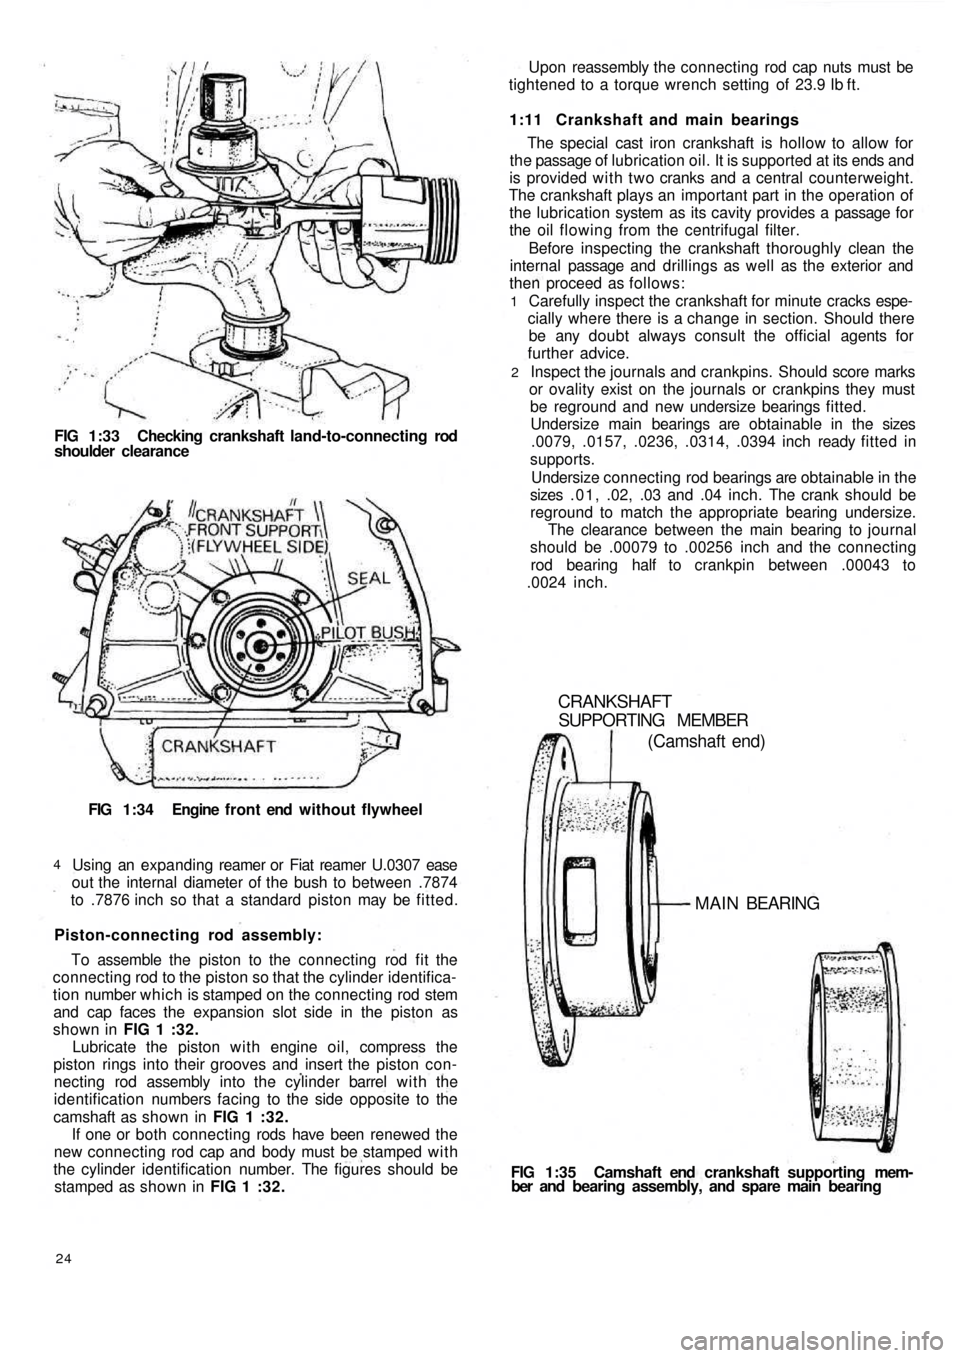 FIAT 500 1957 1.G Workshop Manual FIG 1:33 Checking crankshaft land-to-connecting rod
shoulder clearance
FIG 1:34 Engine  f r o n t  end  without flywheel
Using an expanding reamer or Fiat reamer U.0307 ease
out the internal diameter 